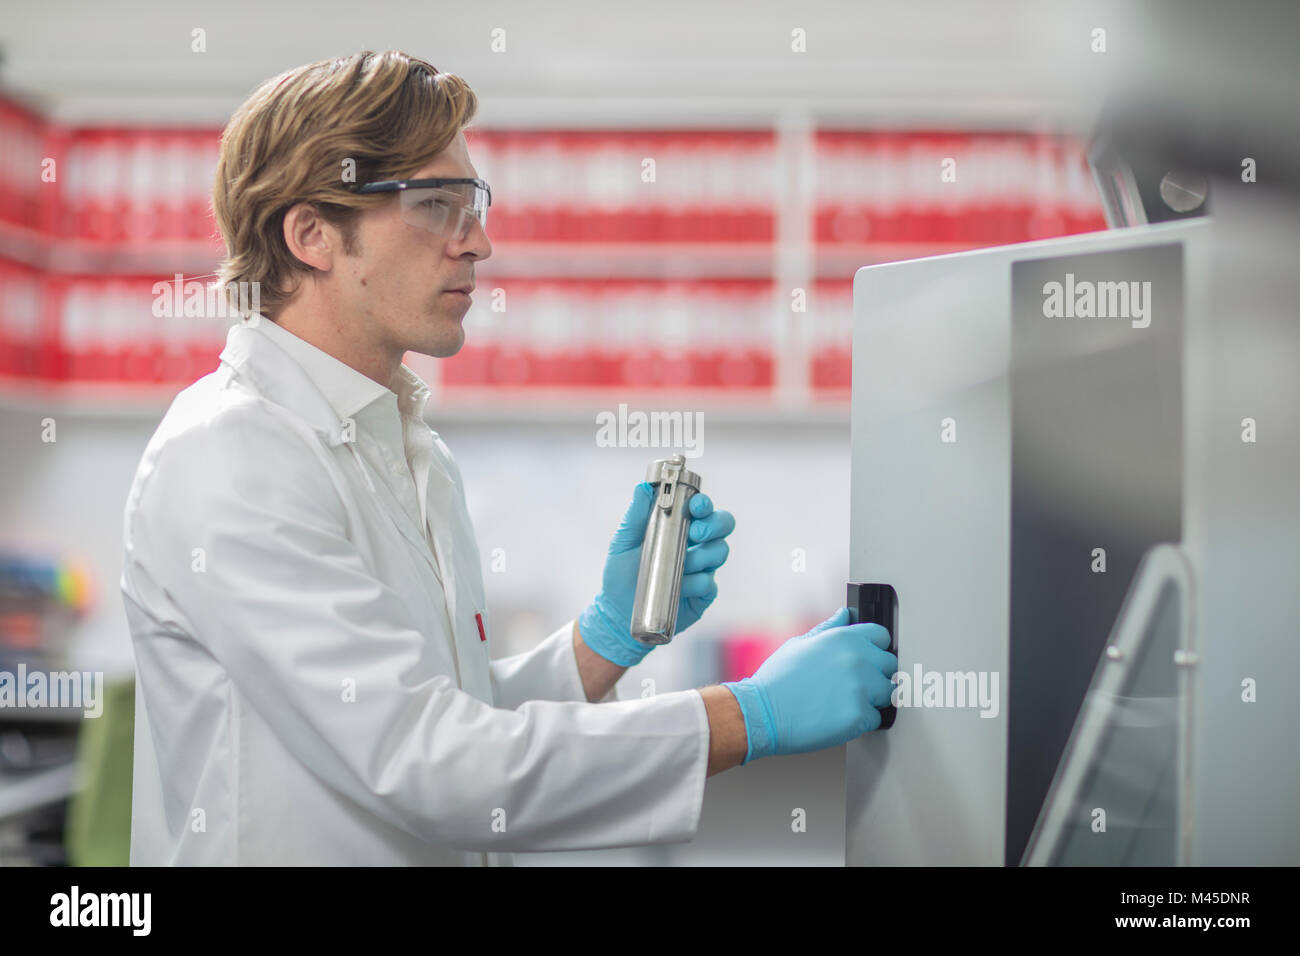 Male worker in thread factory, placing lab samples in chemical oven Stock Photo